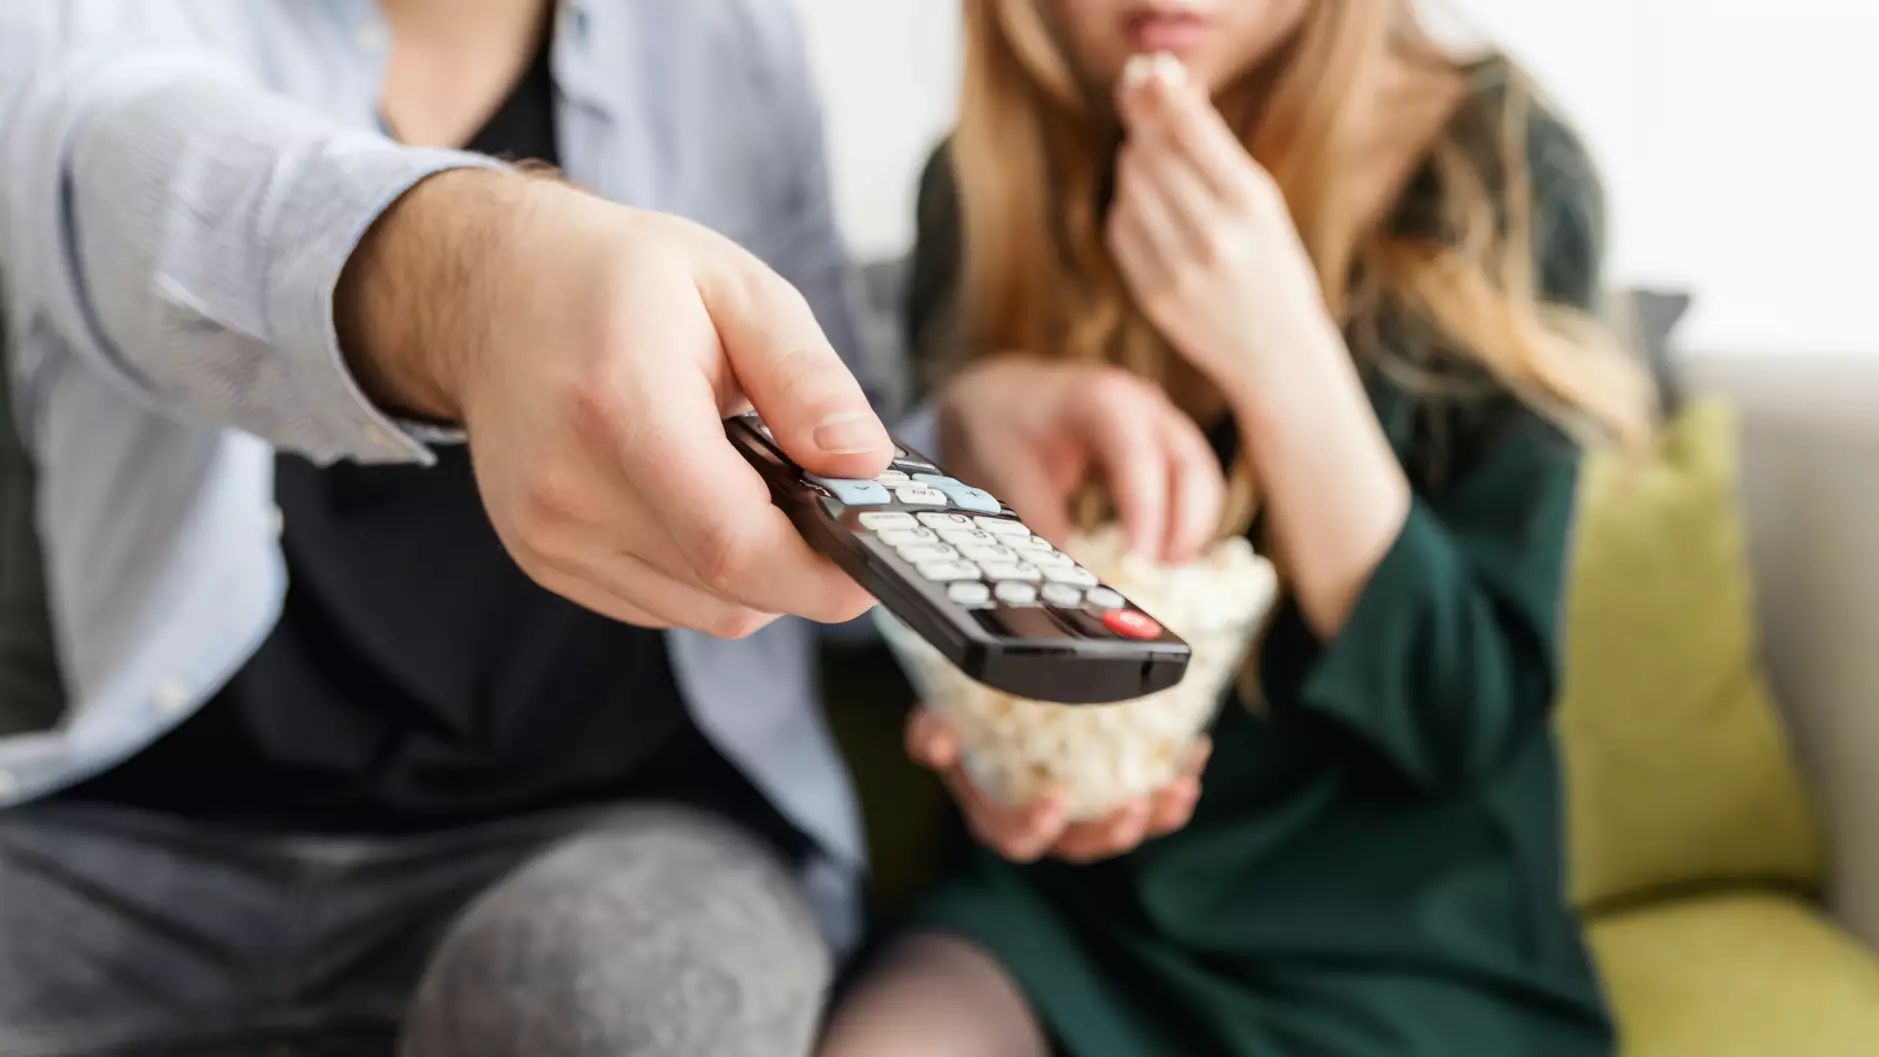 Brits Spend 100 Days Of Their Life Deciding What To Watch On TV